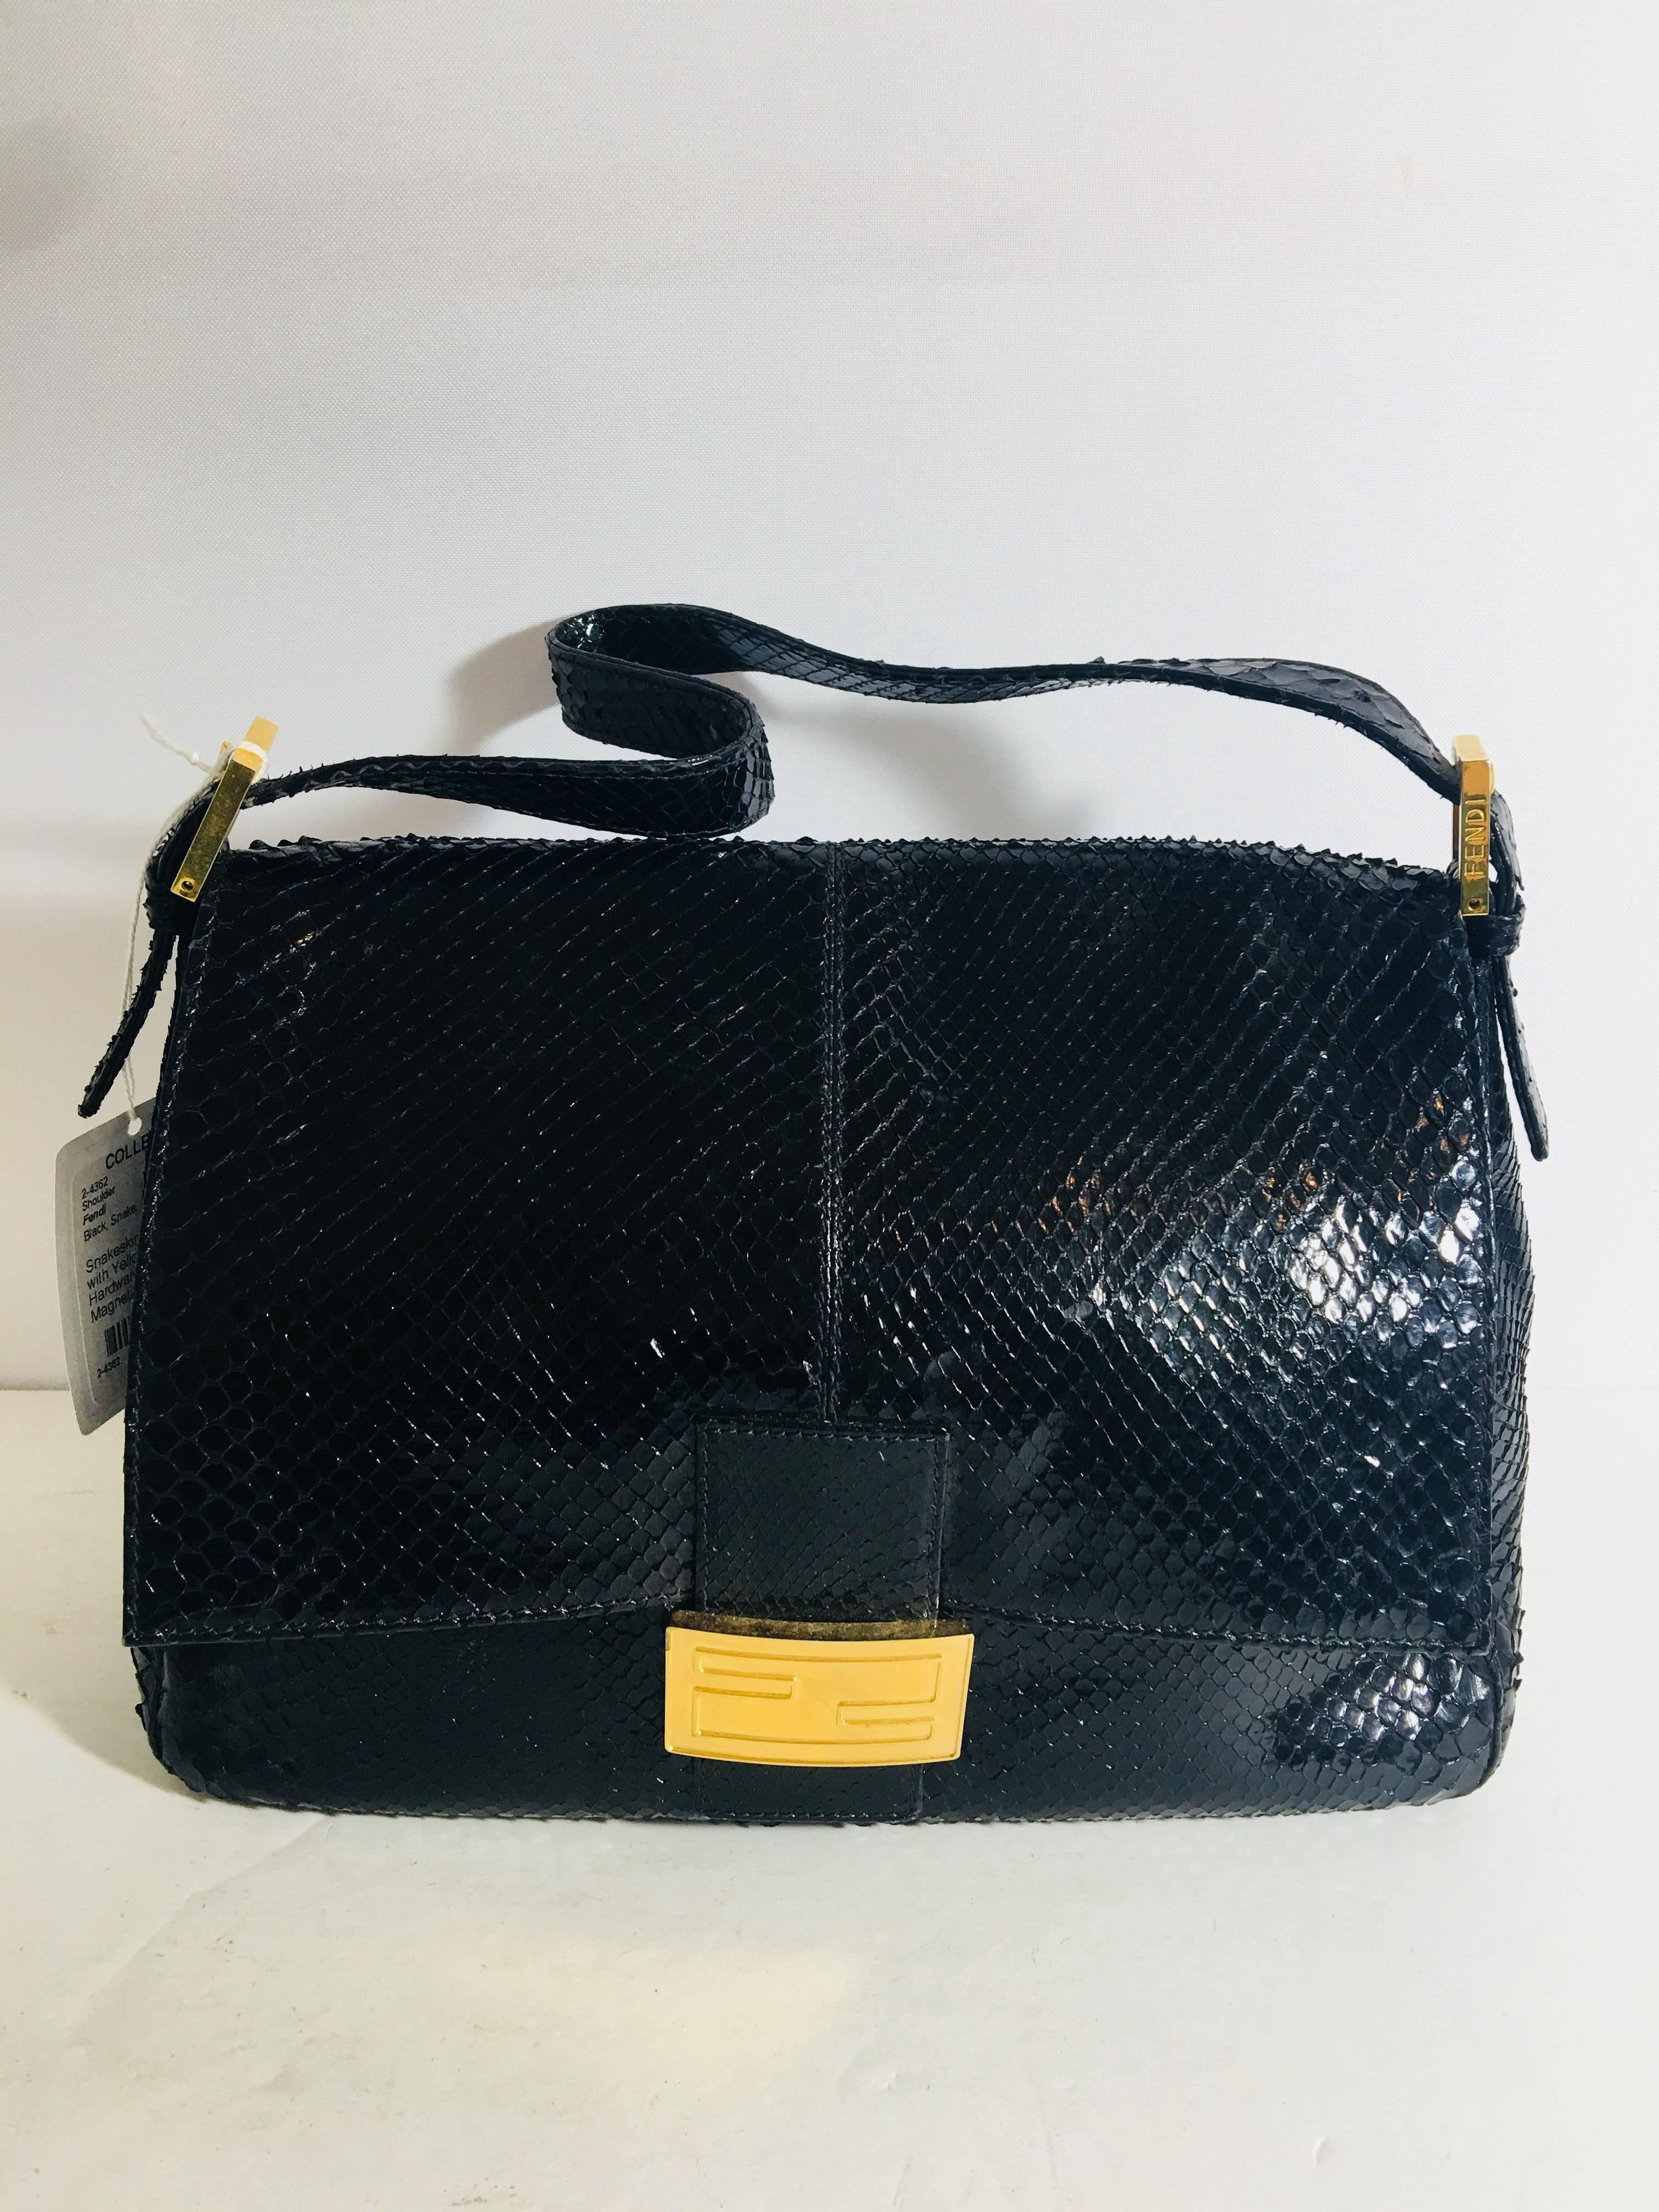 Fendi Black Snake Skin Hobo Bag with Yellow Gold Hardware and Magnetic Closure.